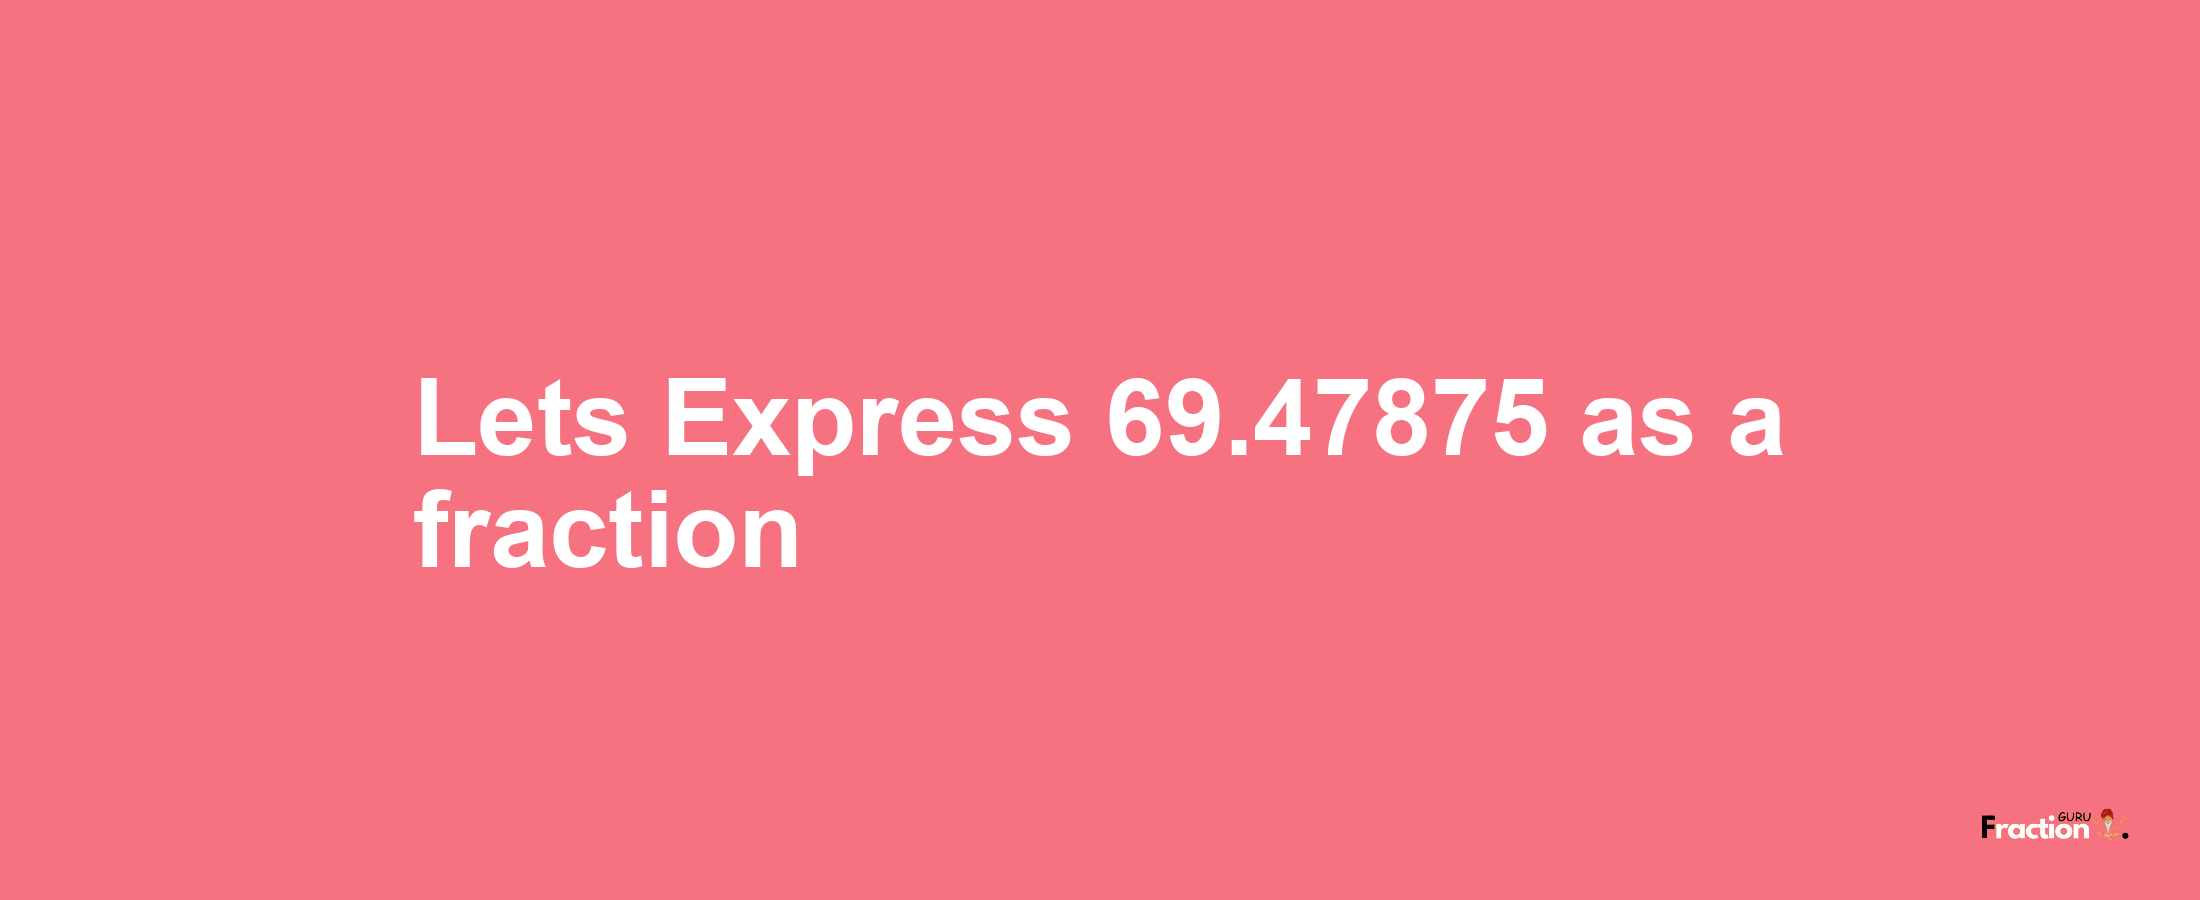 Lets Express 69.47875 as afraction